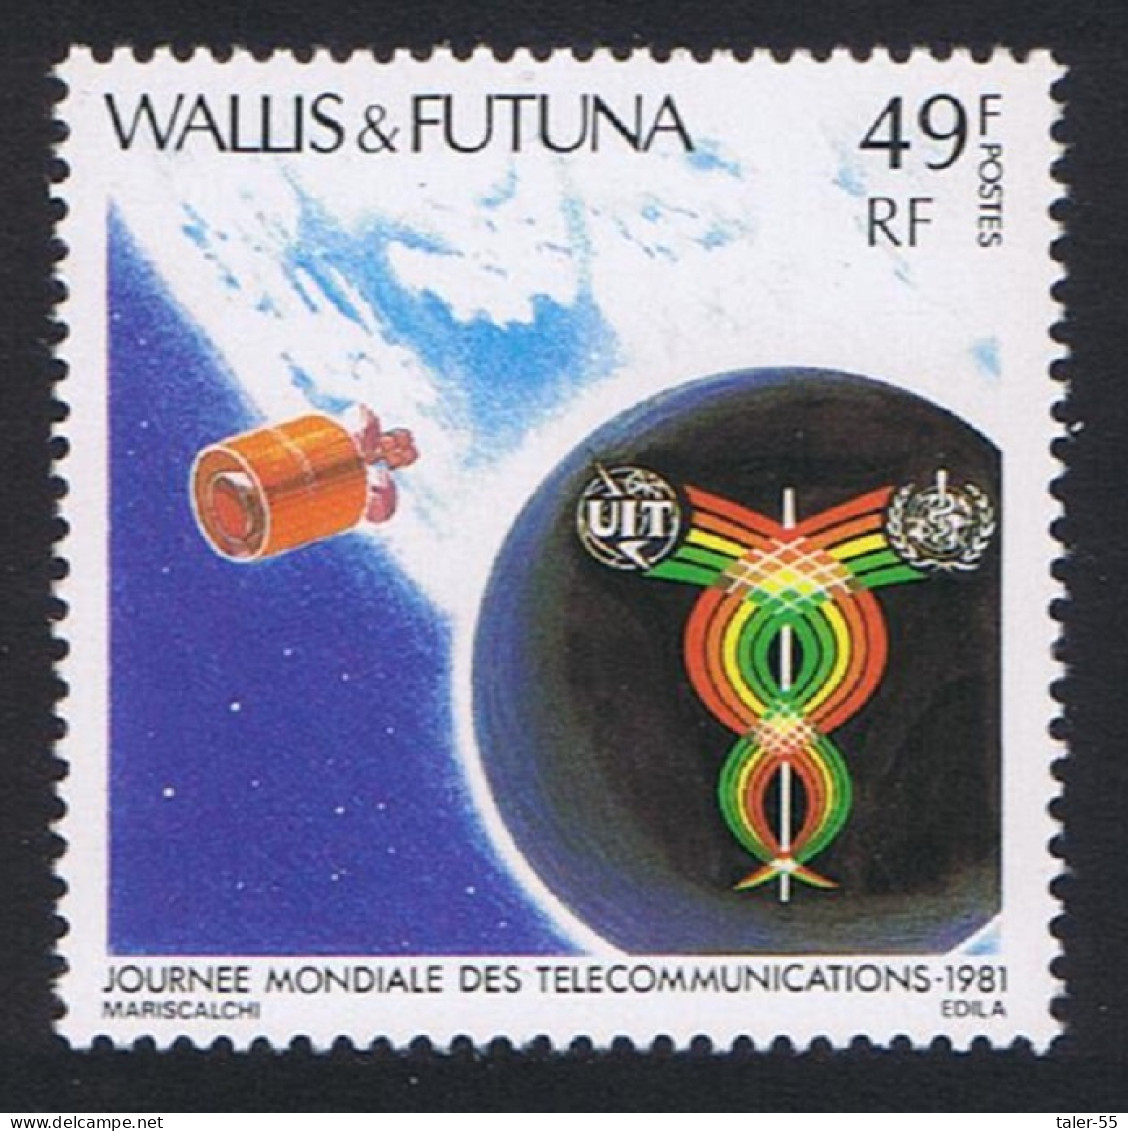 Wallis And Futuna Space World Telecom Day 1981 MNH SG#368 Sc#262 - Unused Stamps